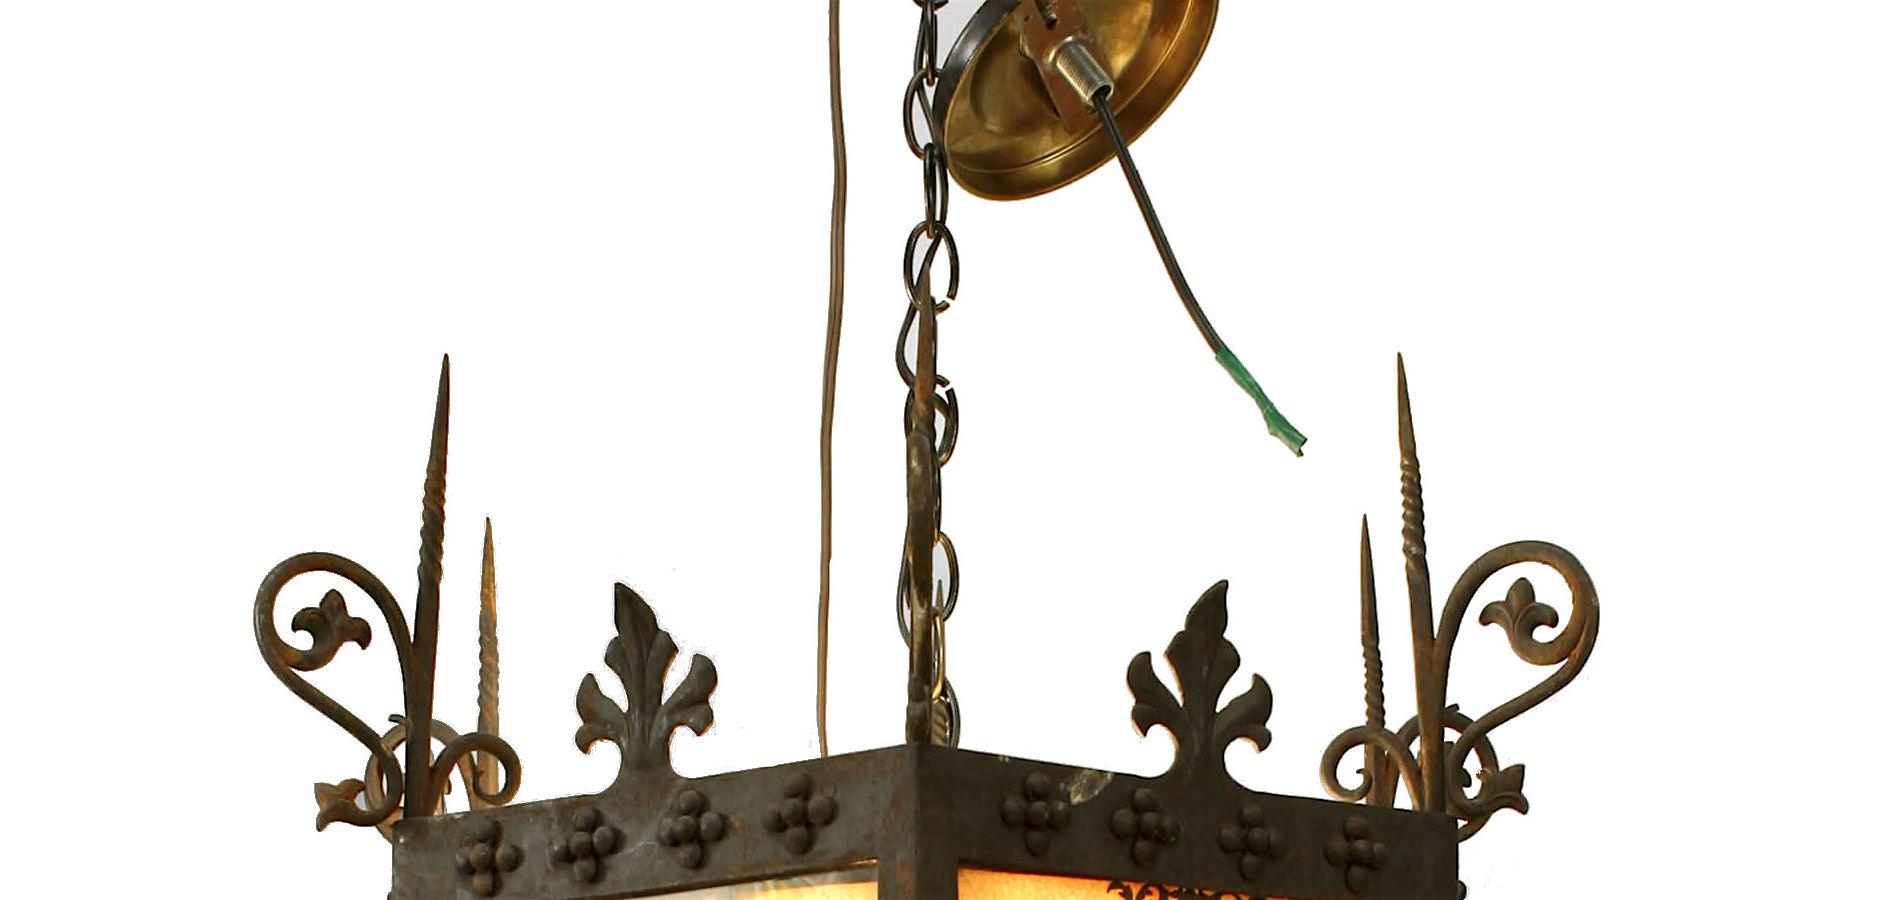 2 Italian Renaissance-style (19th Century) wrought iron 6 sided hanging lanterns with silhouette arch design with scenes on glass panels. Signed (PRICED EACH).
